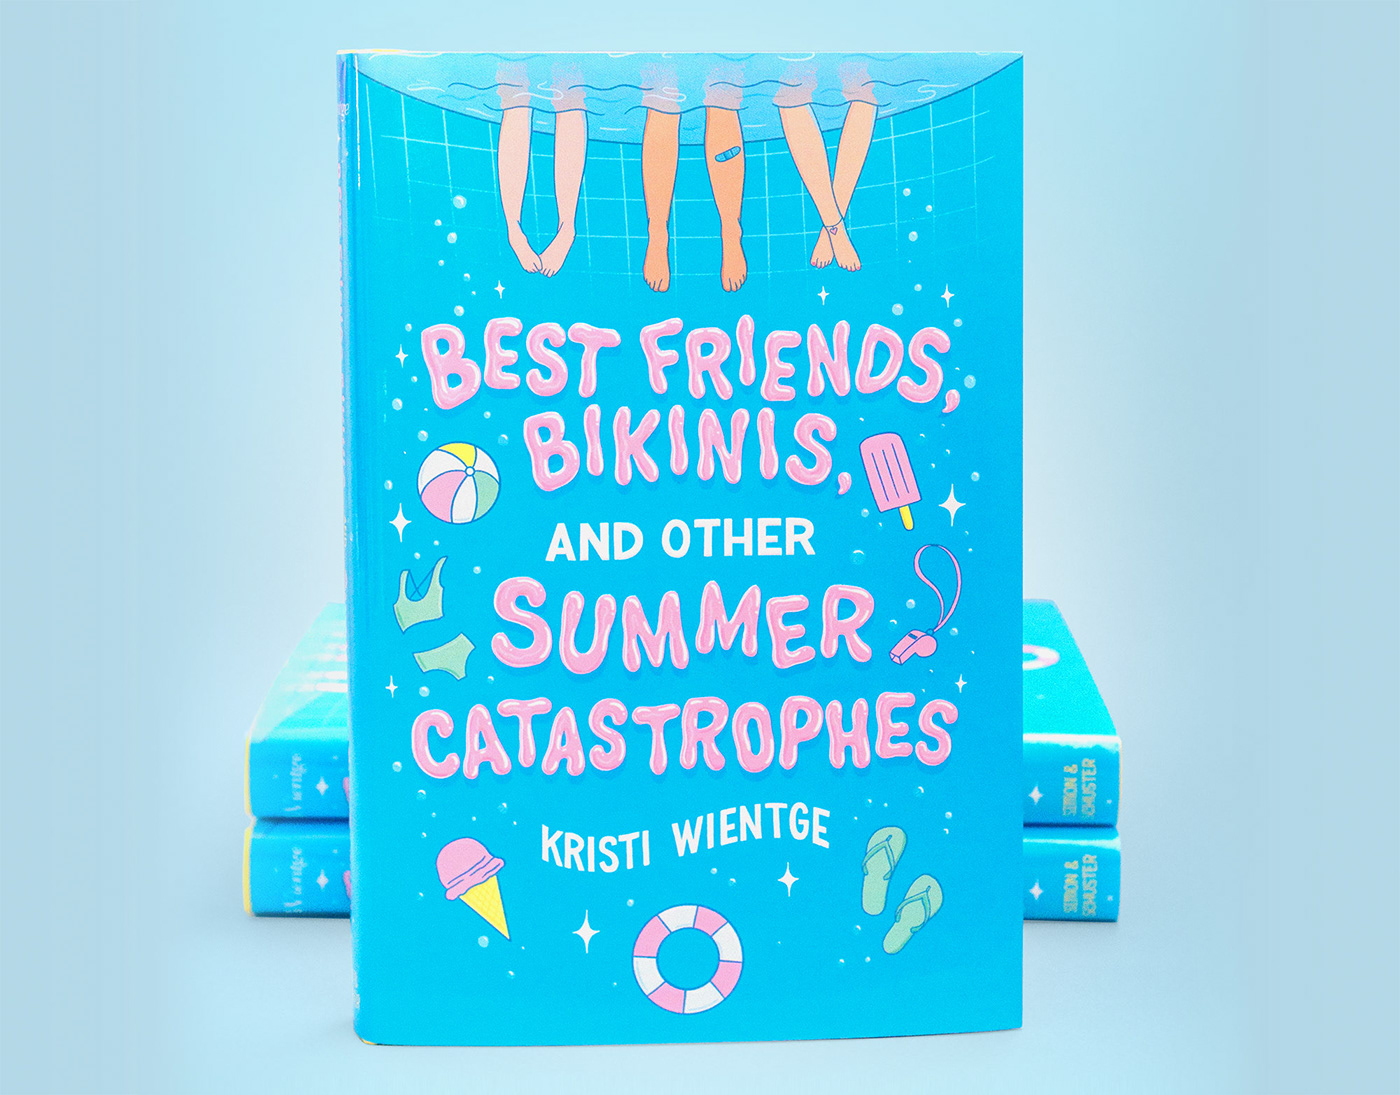 A blue book cover with bubbly, kid-friendly lettering and illustration. 